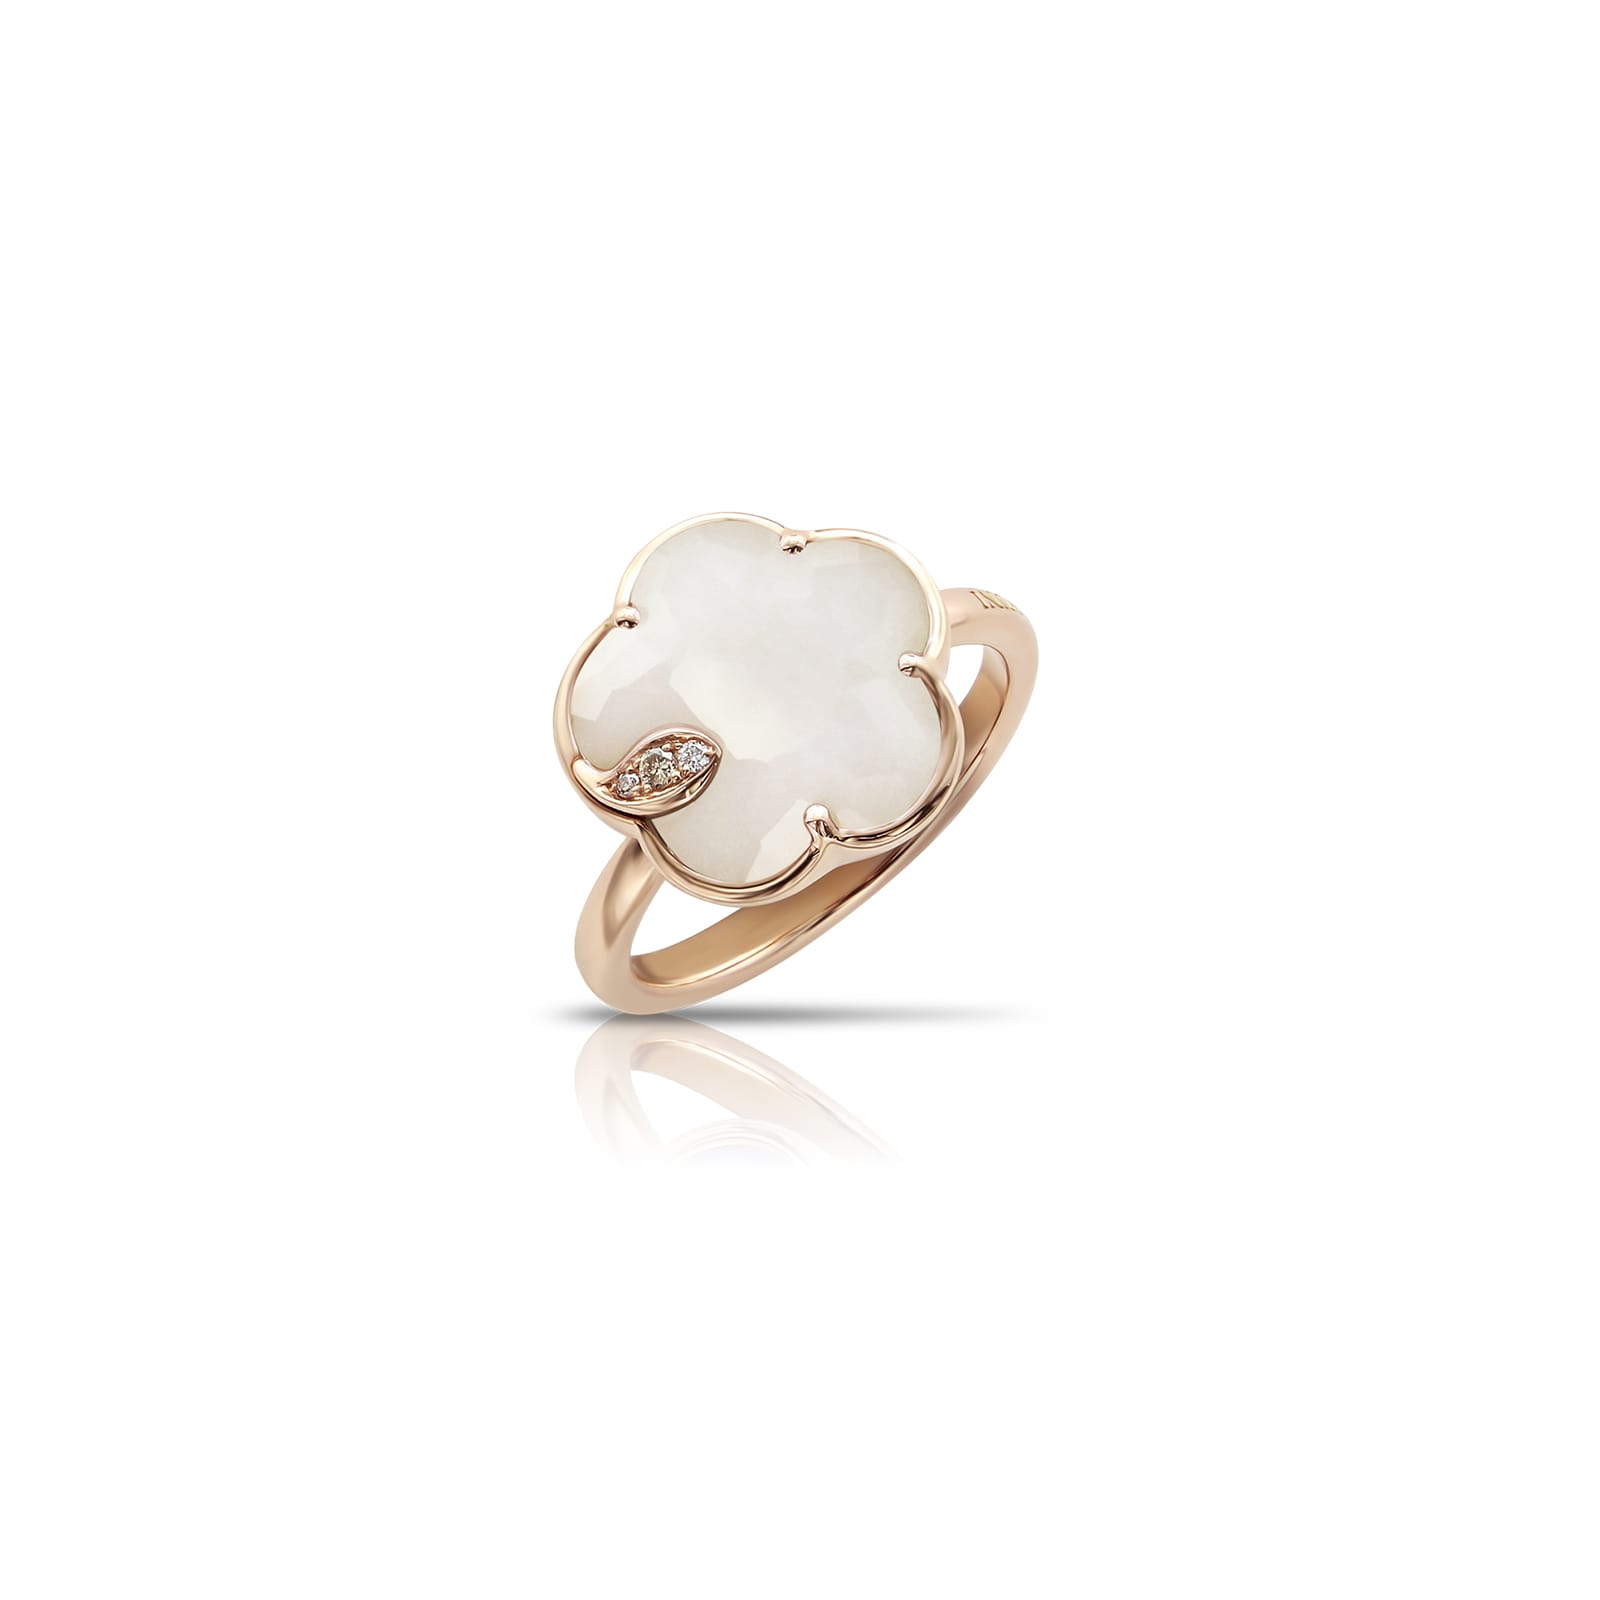 Petit Joli Ring in 18ct Rose Gold with White Agate and Diamonds - Ring Size M